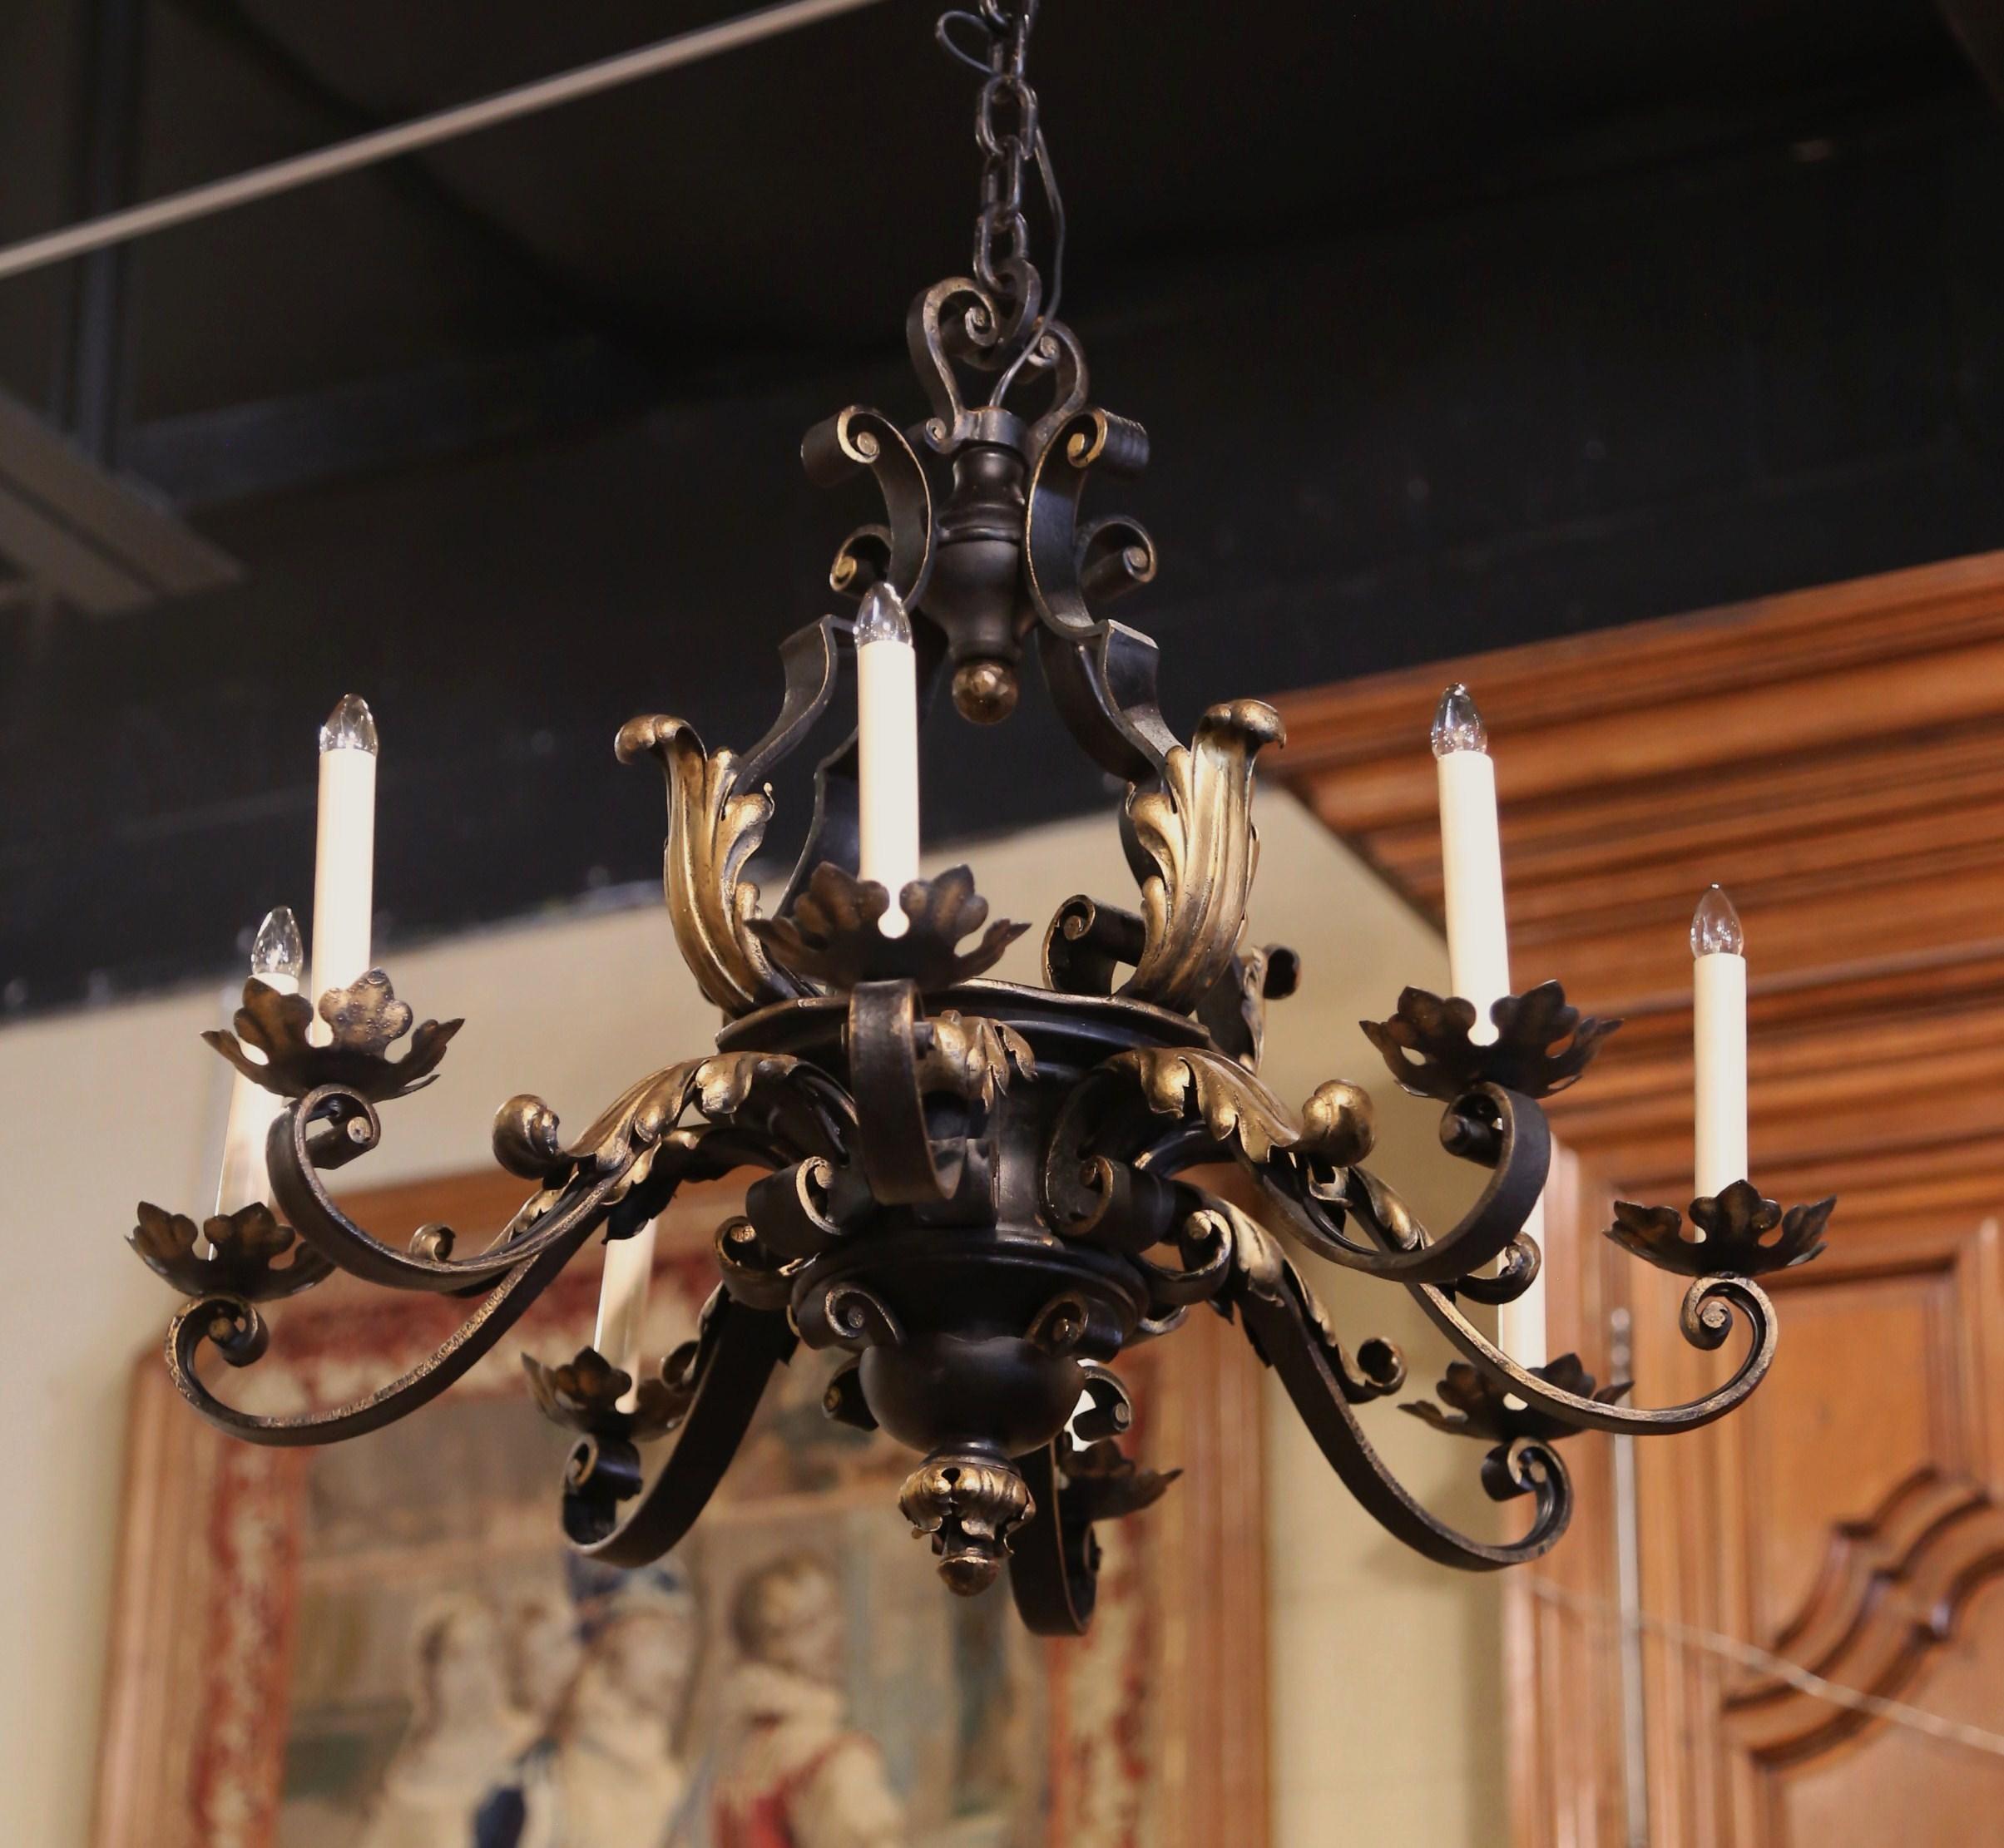 This elegant antique iron chandelier was created in France, circa 1920. Round in shape, the scrolling chandelier is decorated with a central decorative motif with inside finial; it has eight, wired arms embellished with metal acanthus leaves and